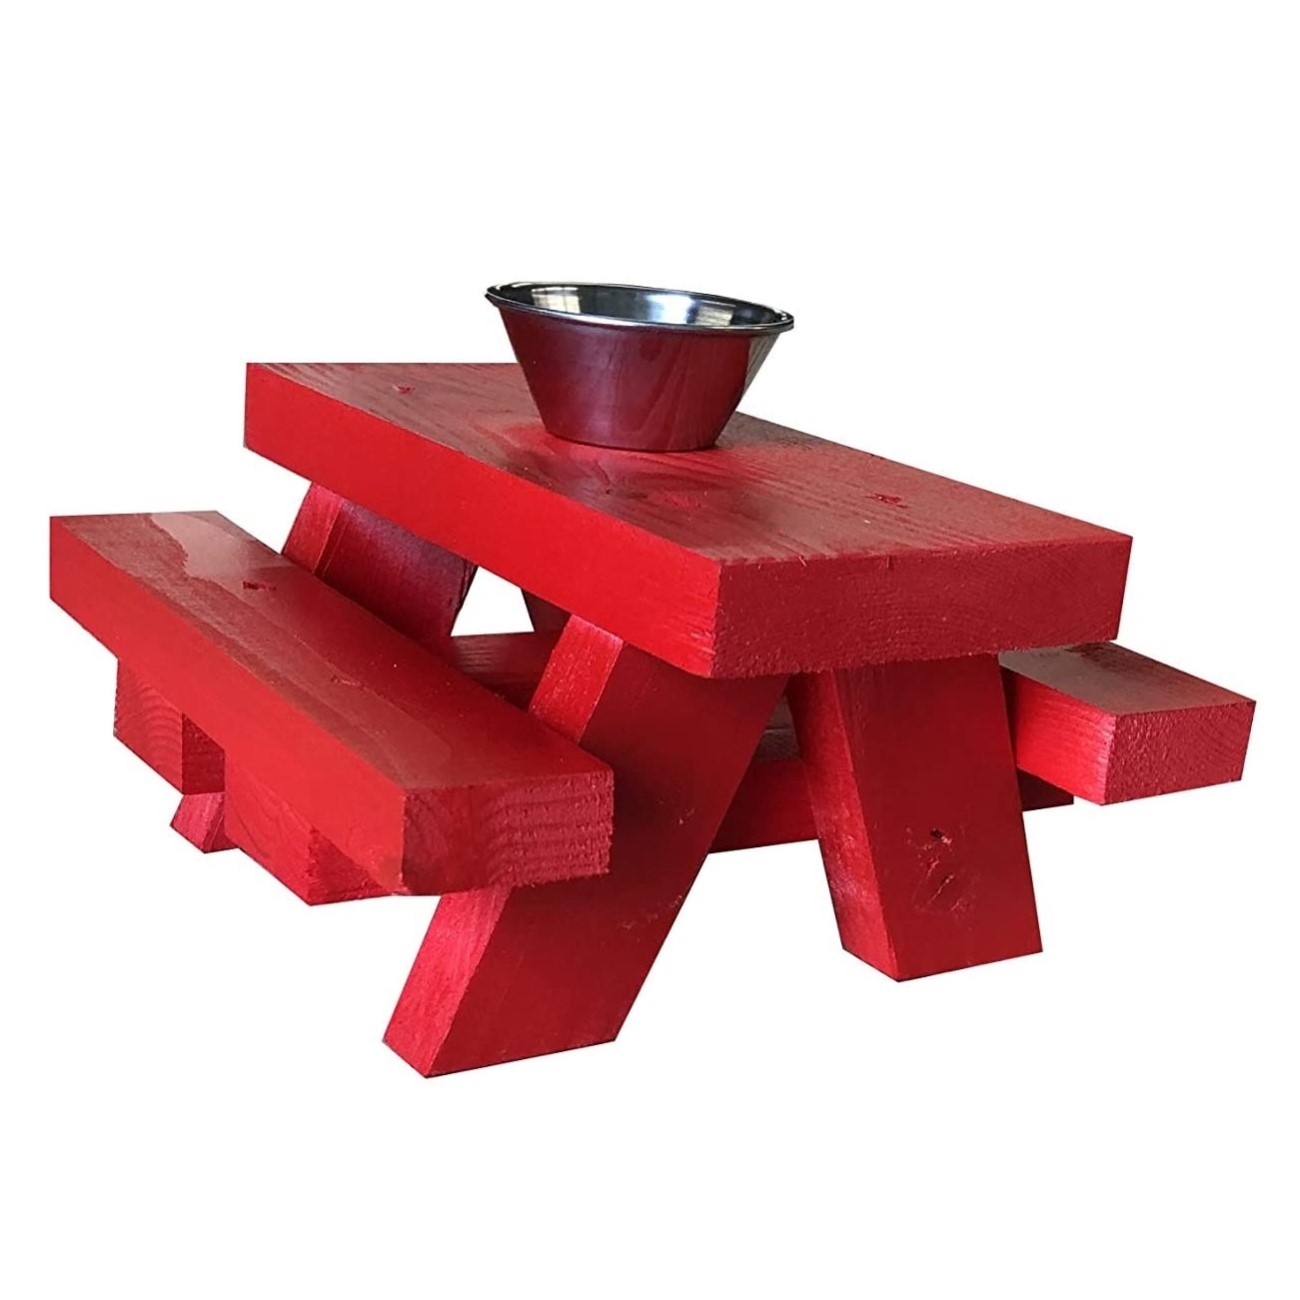 SquirrelSupply.com - Squirrel-Feeder-Picnic-Table-with-Cup-Feed-Red-in-Color-Floor-or-Table-Top-Mount-Hand-Made-in-USA-No-Tools-Required-–-Loose-Food-Feeder-for-Corn-or-Seed-1